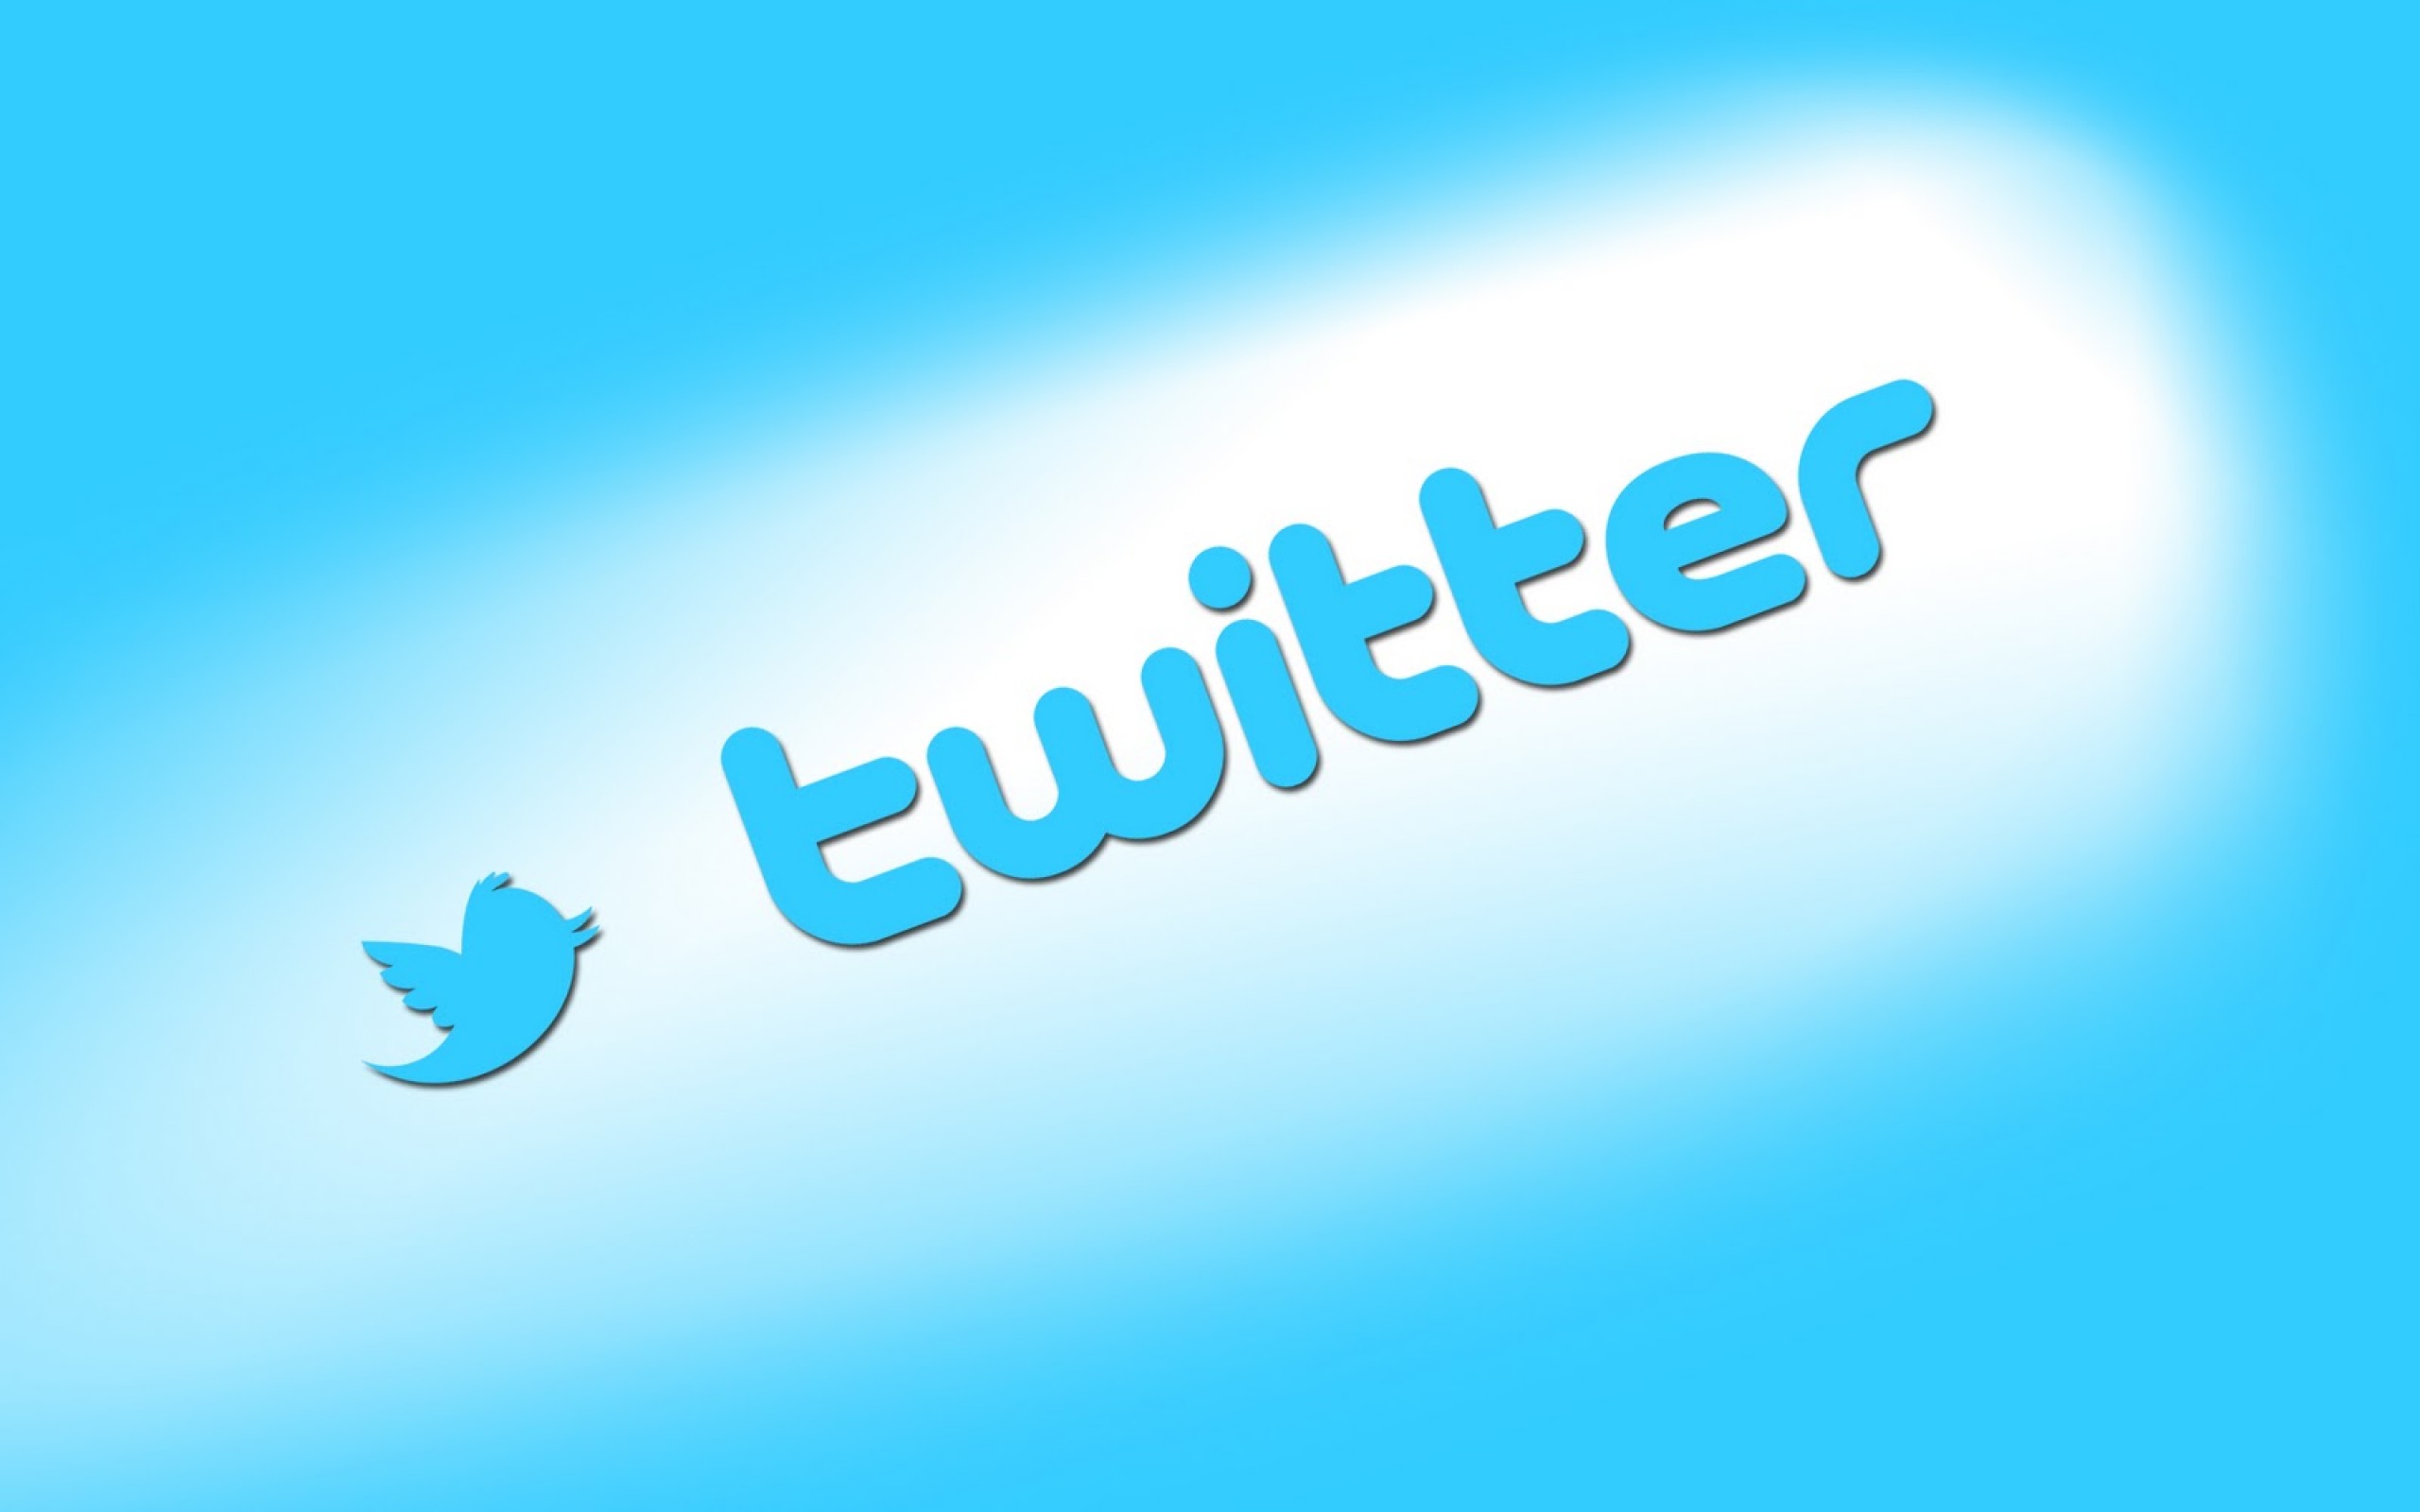 how to download twitter video